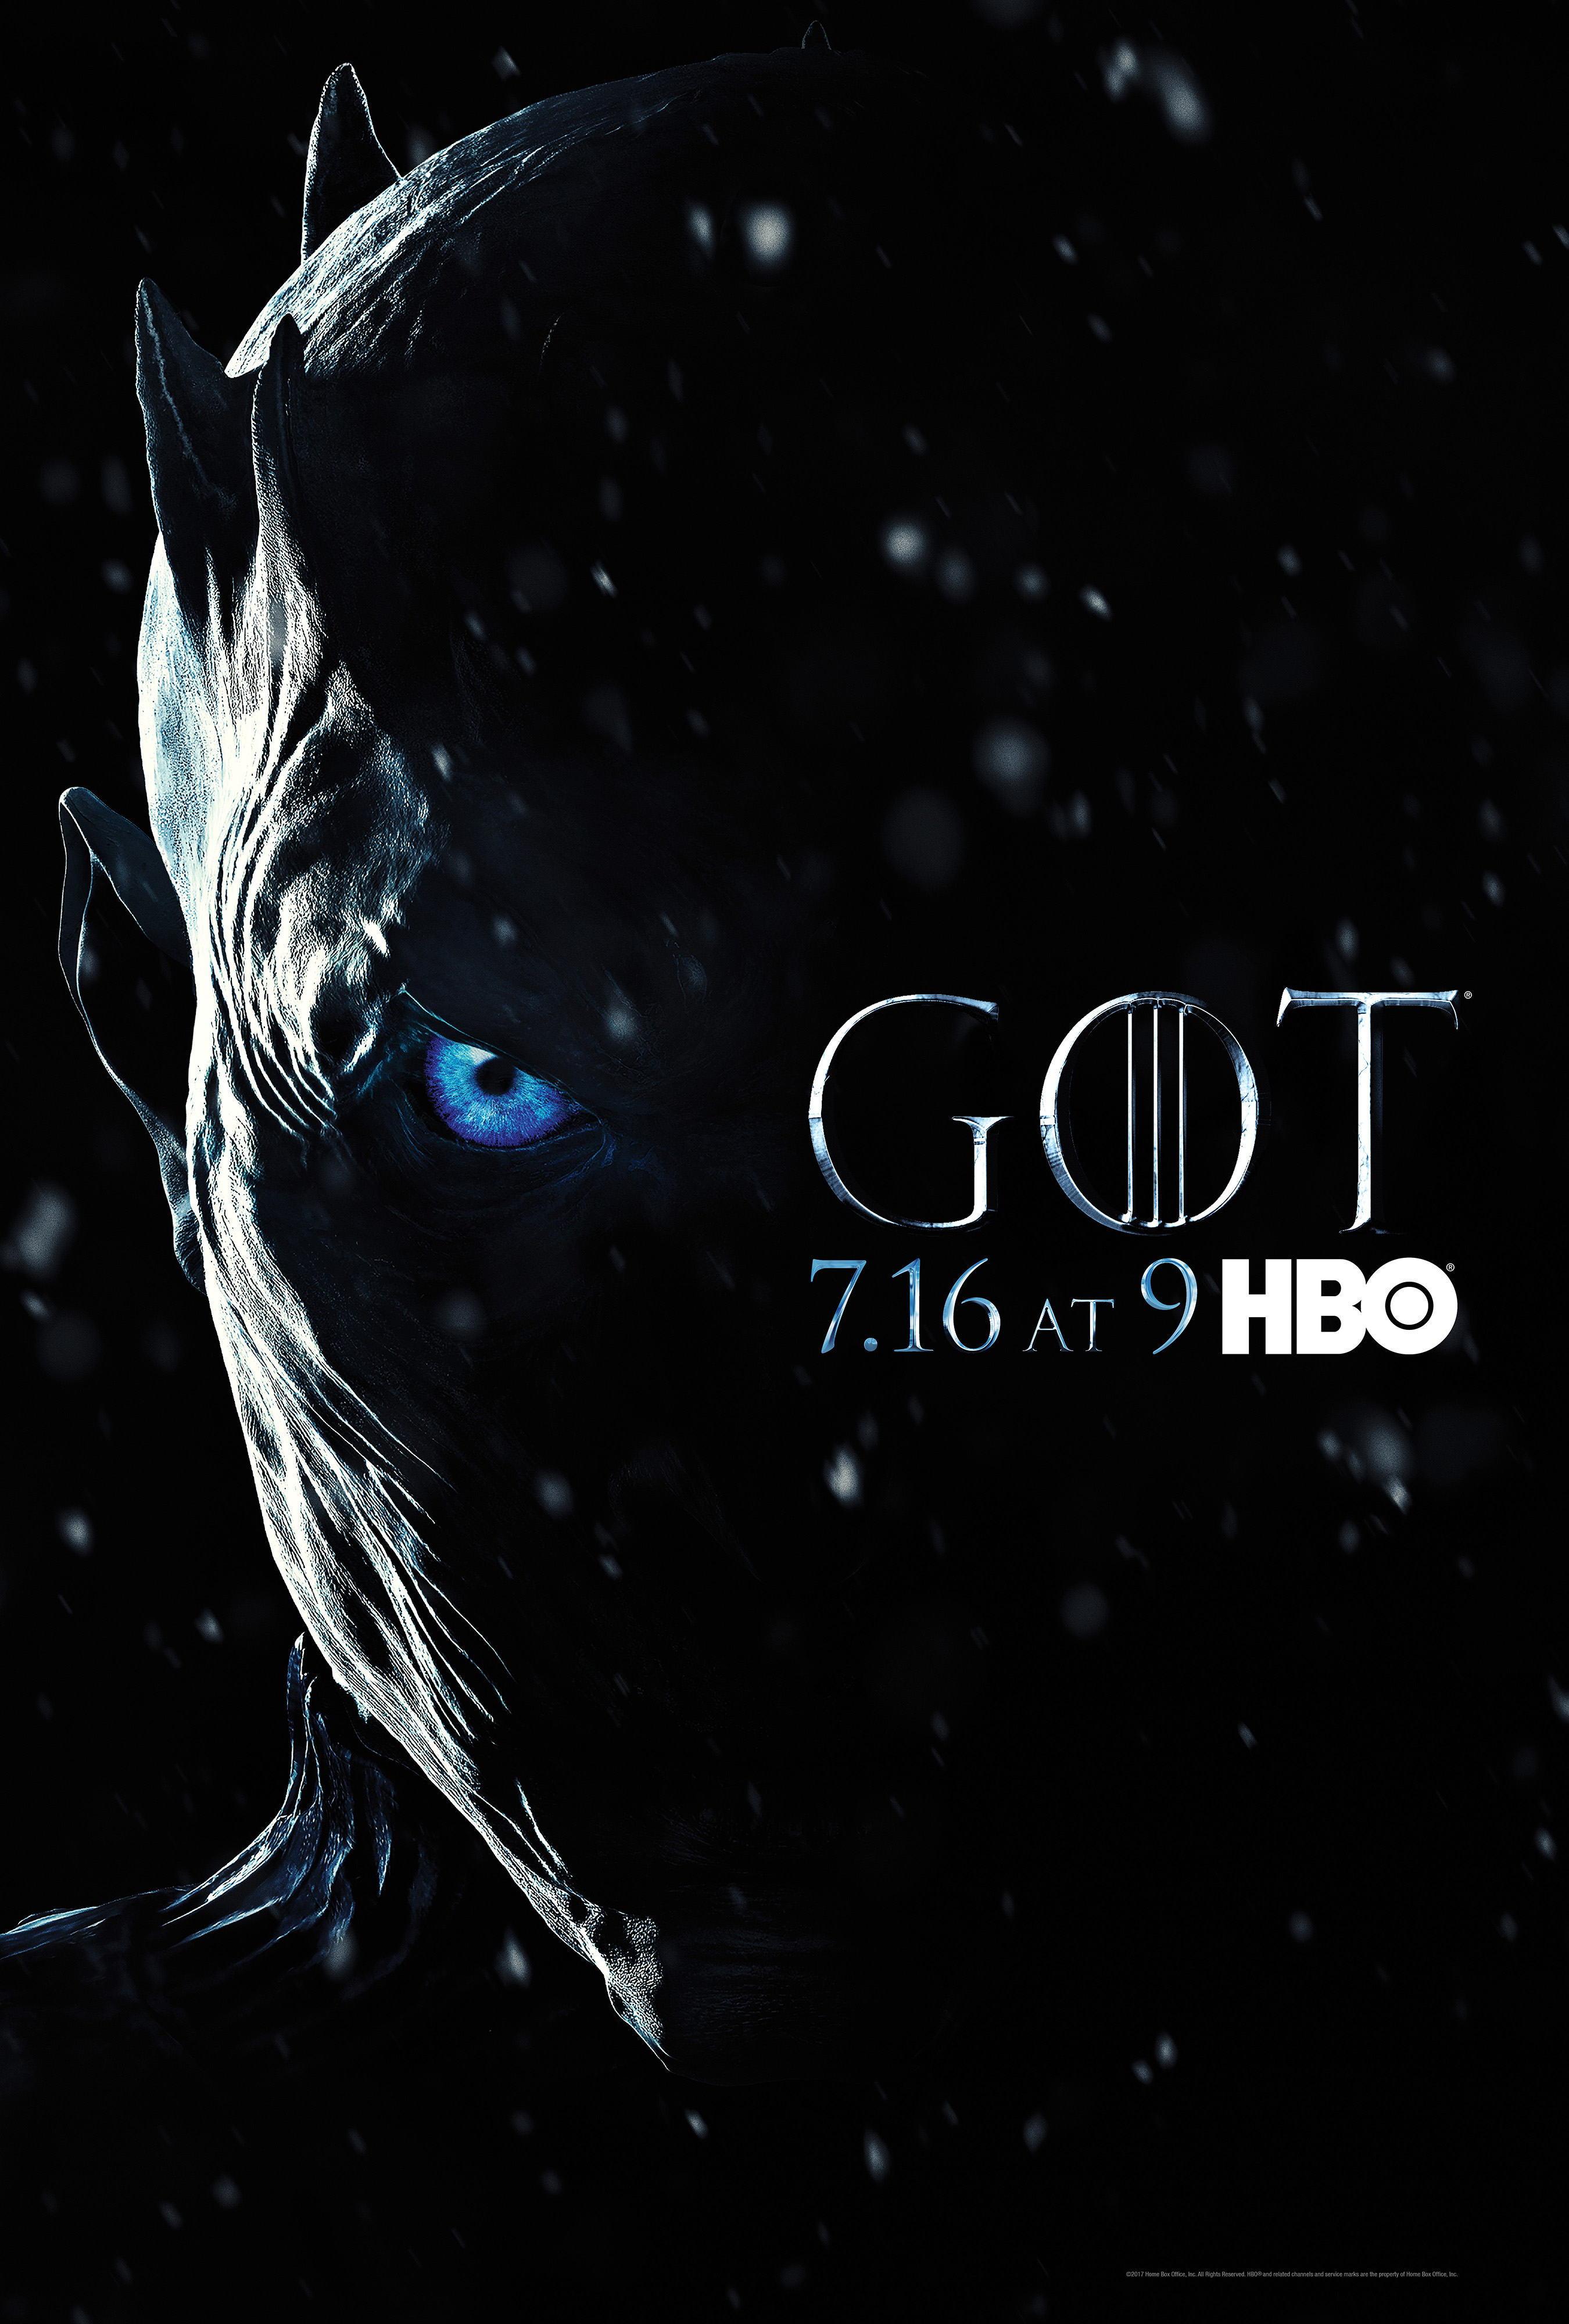 Game of Thrones S07E03 | The Queen's Justice  (30 Jul 2017)|   webTV 720p (fhdhub.net).mp4